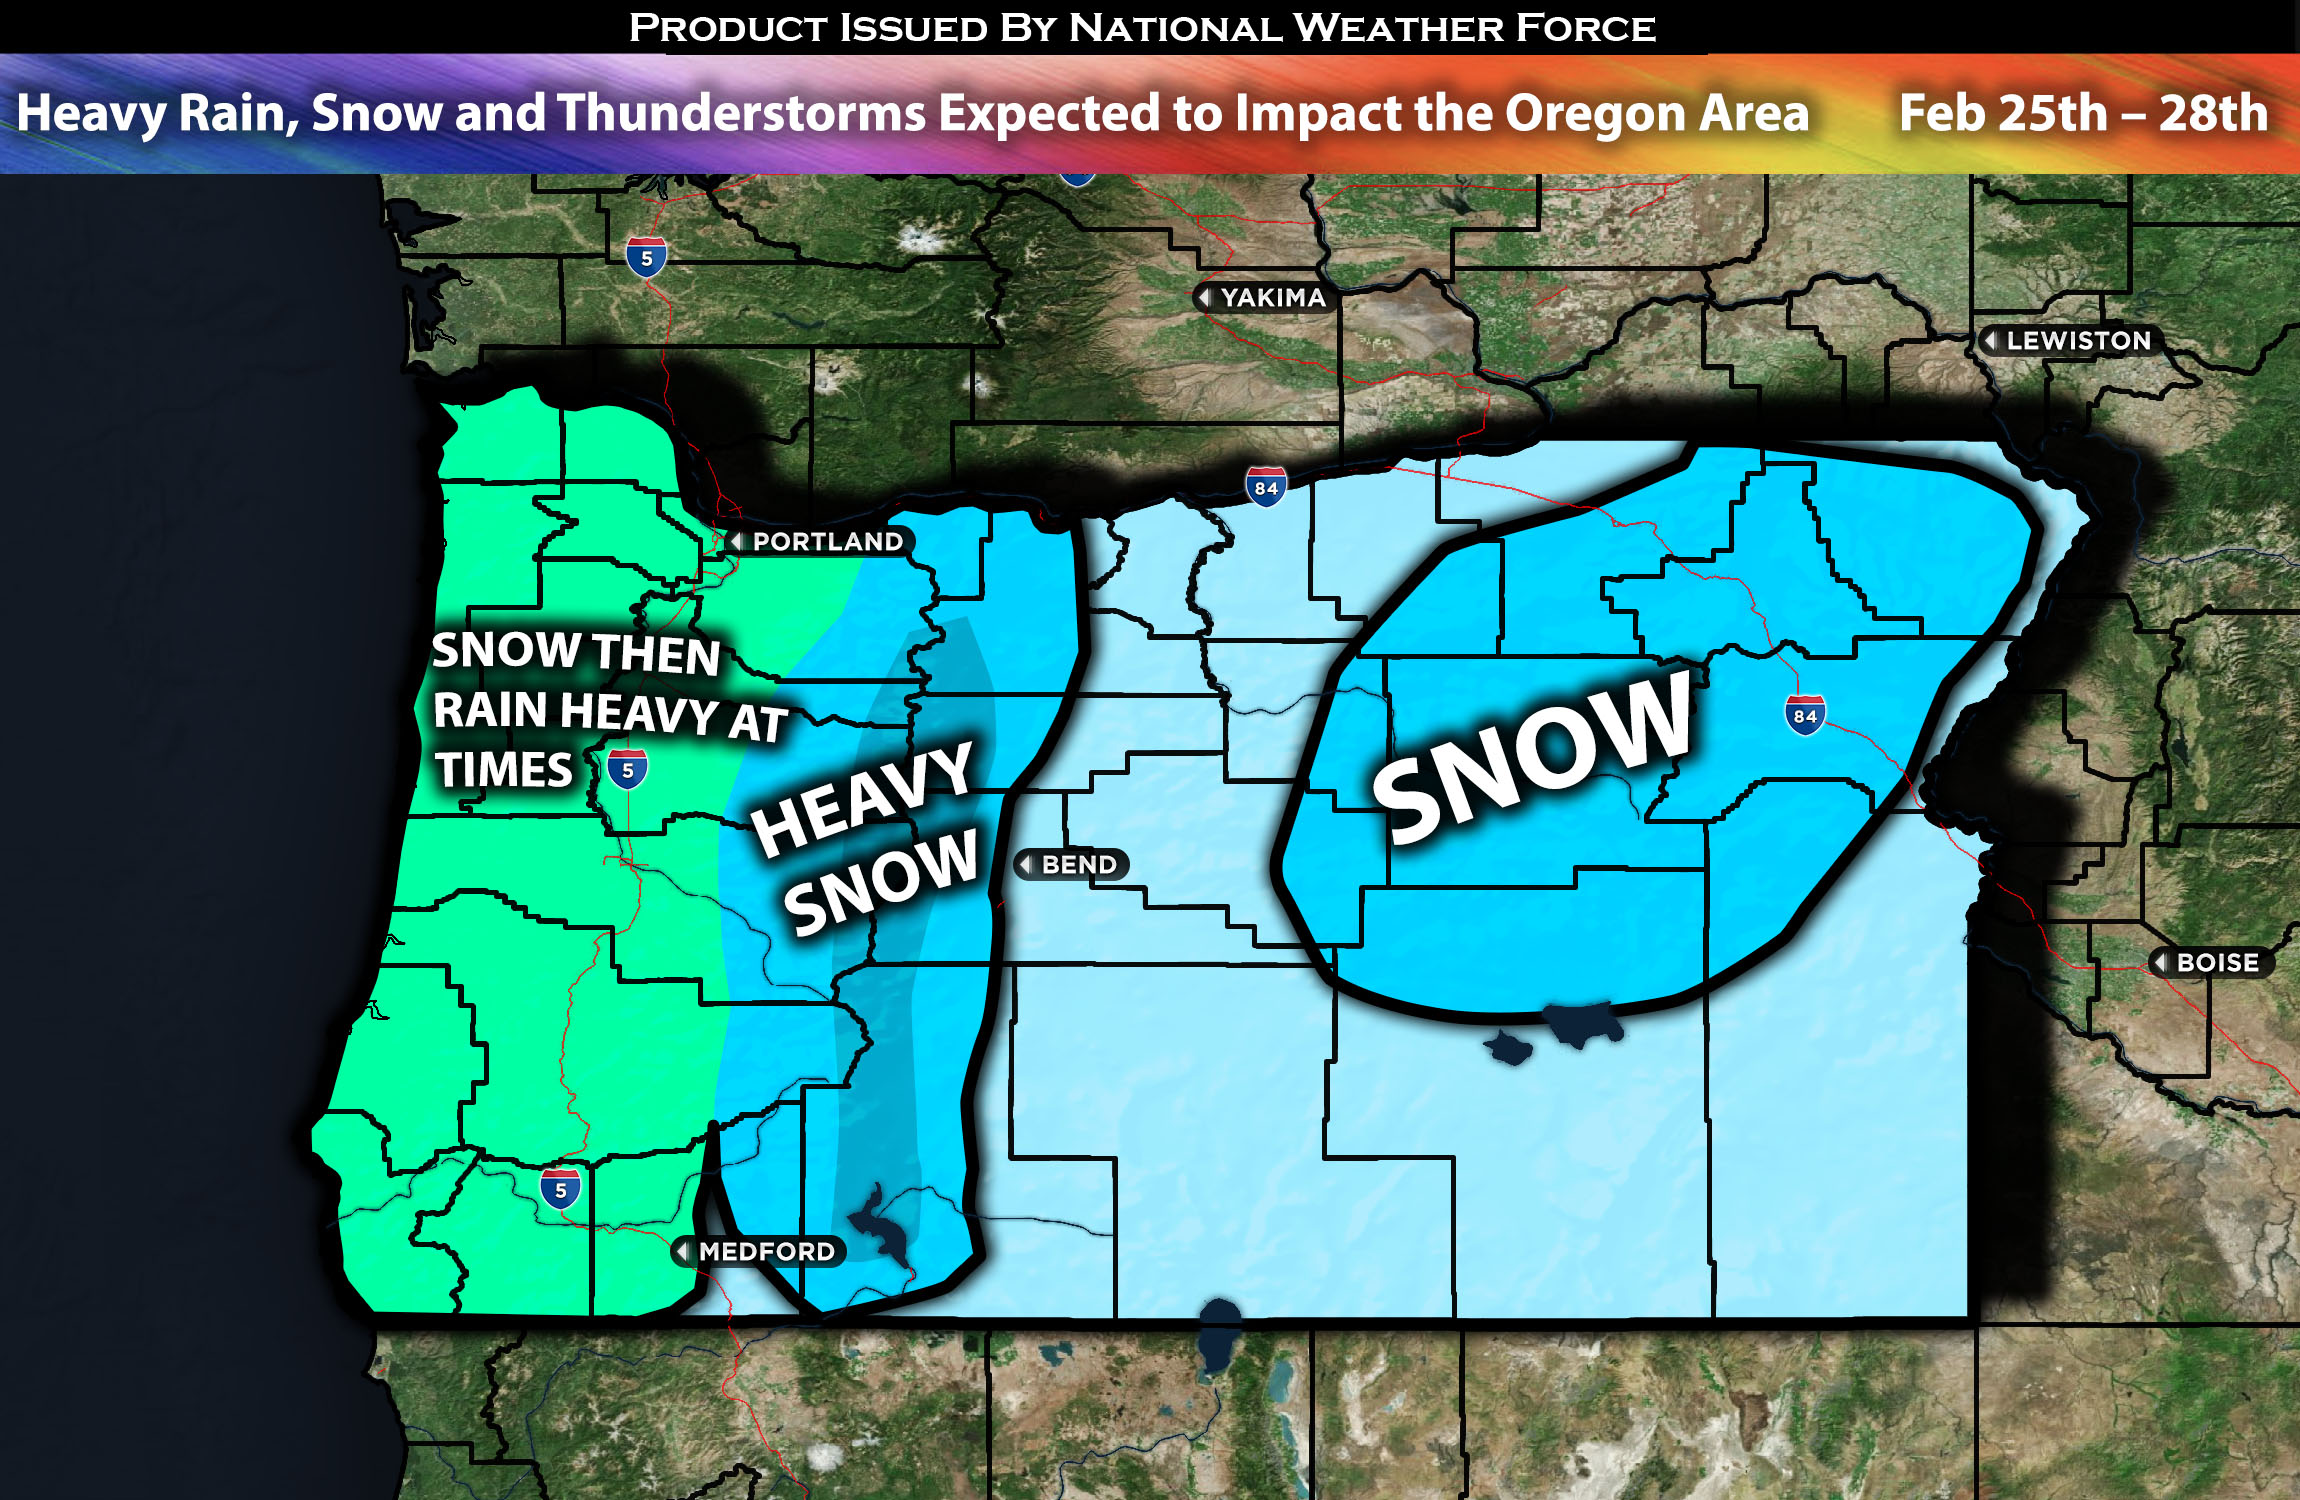 Heavy Rain, Snow and Thunderstorms Expected to Impact the Oregon Area from Feb 25th – 28th